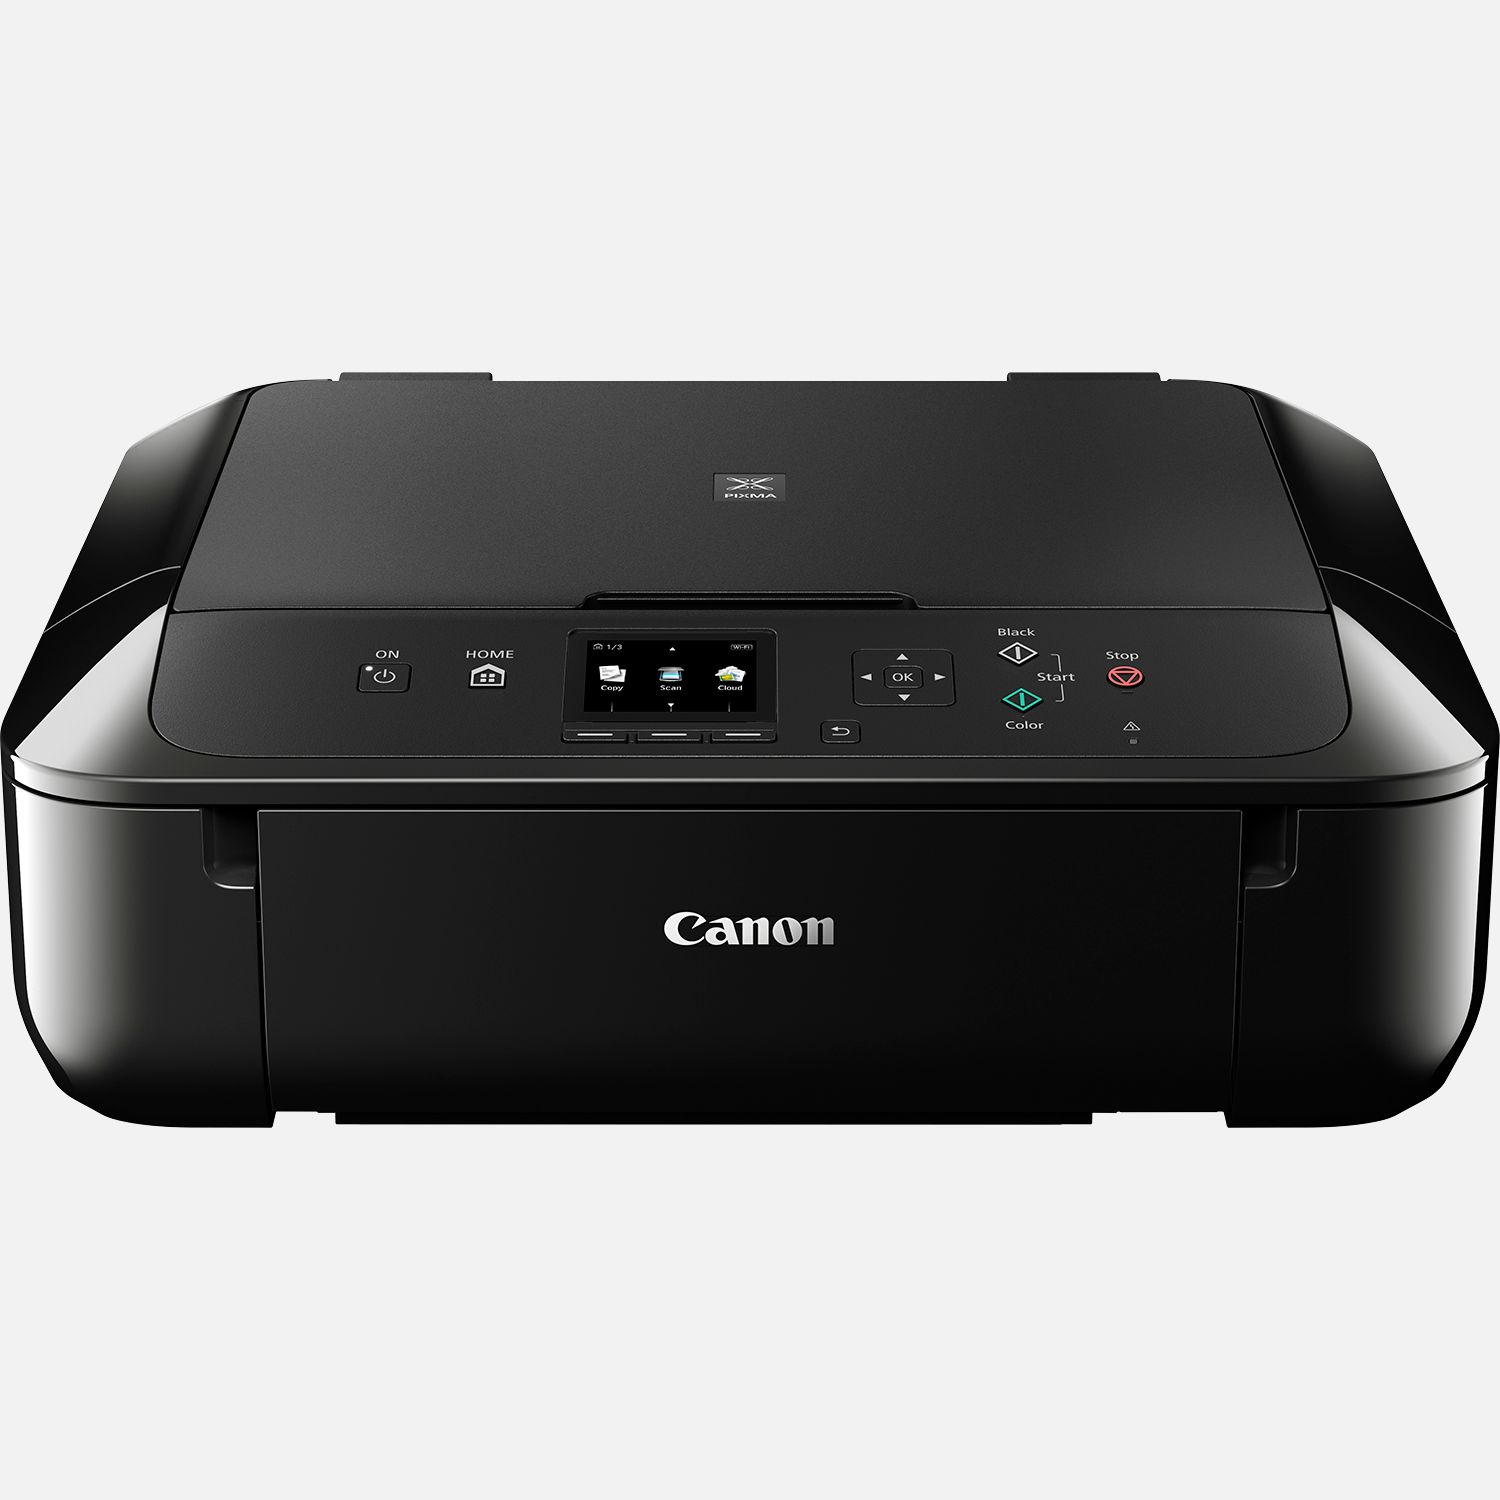 User manual Canon Pixma MG5750 (English - 2 pages)